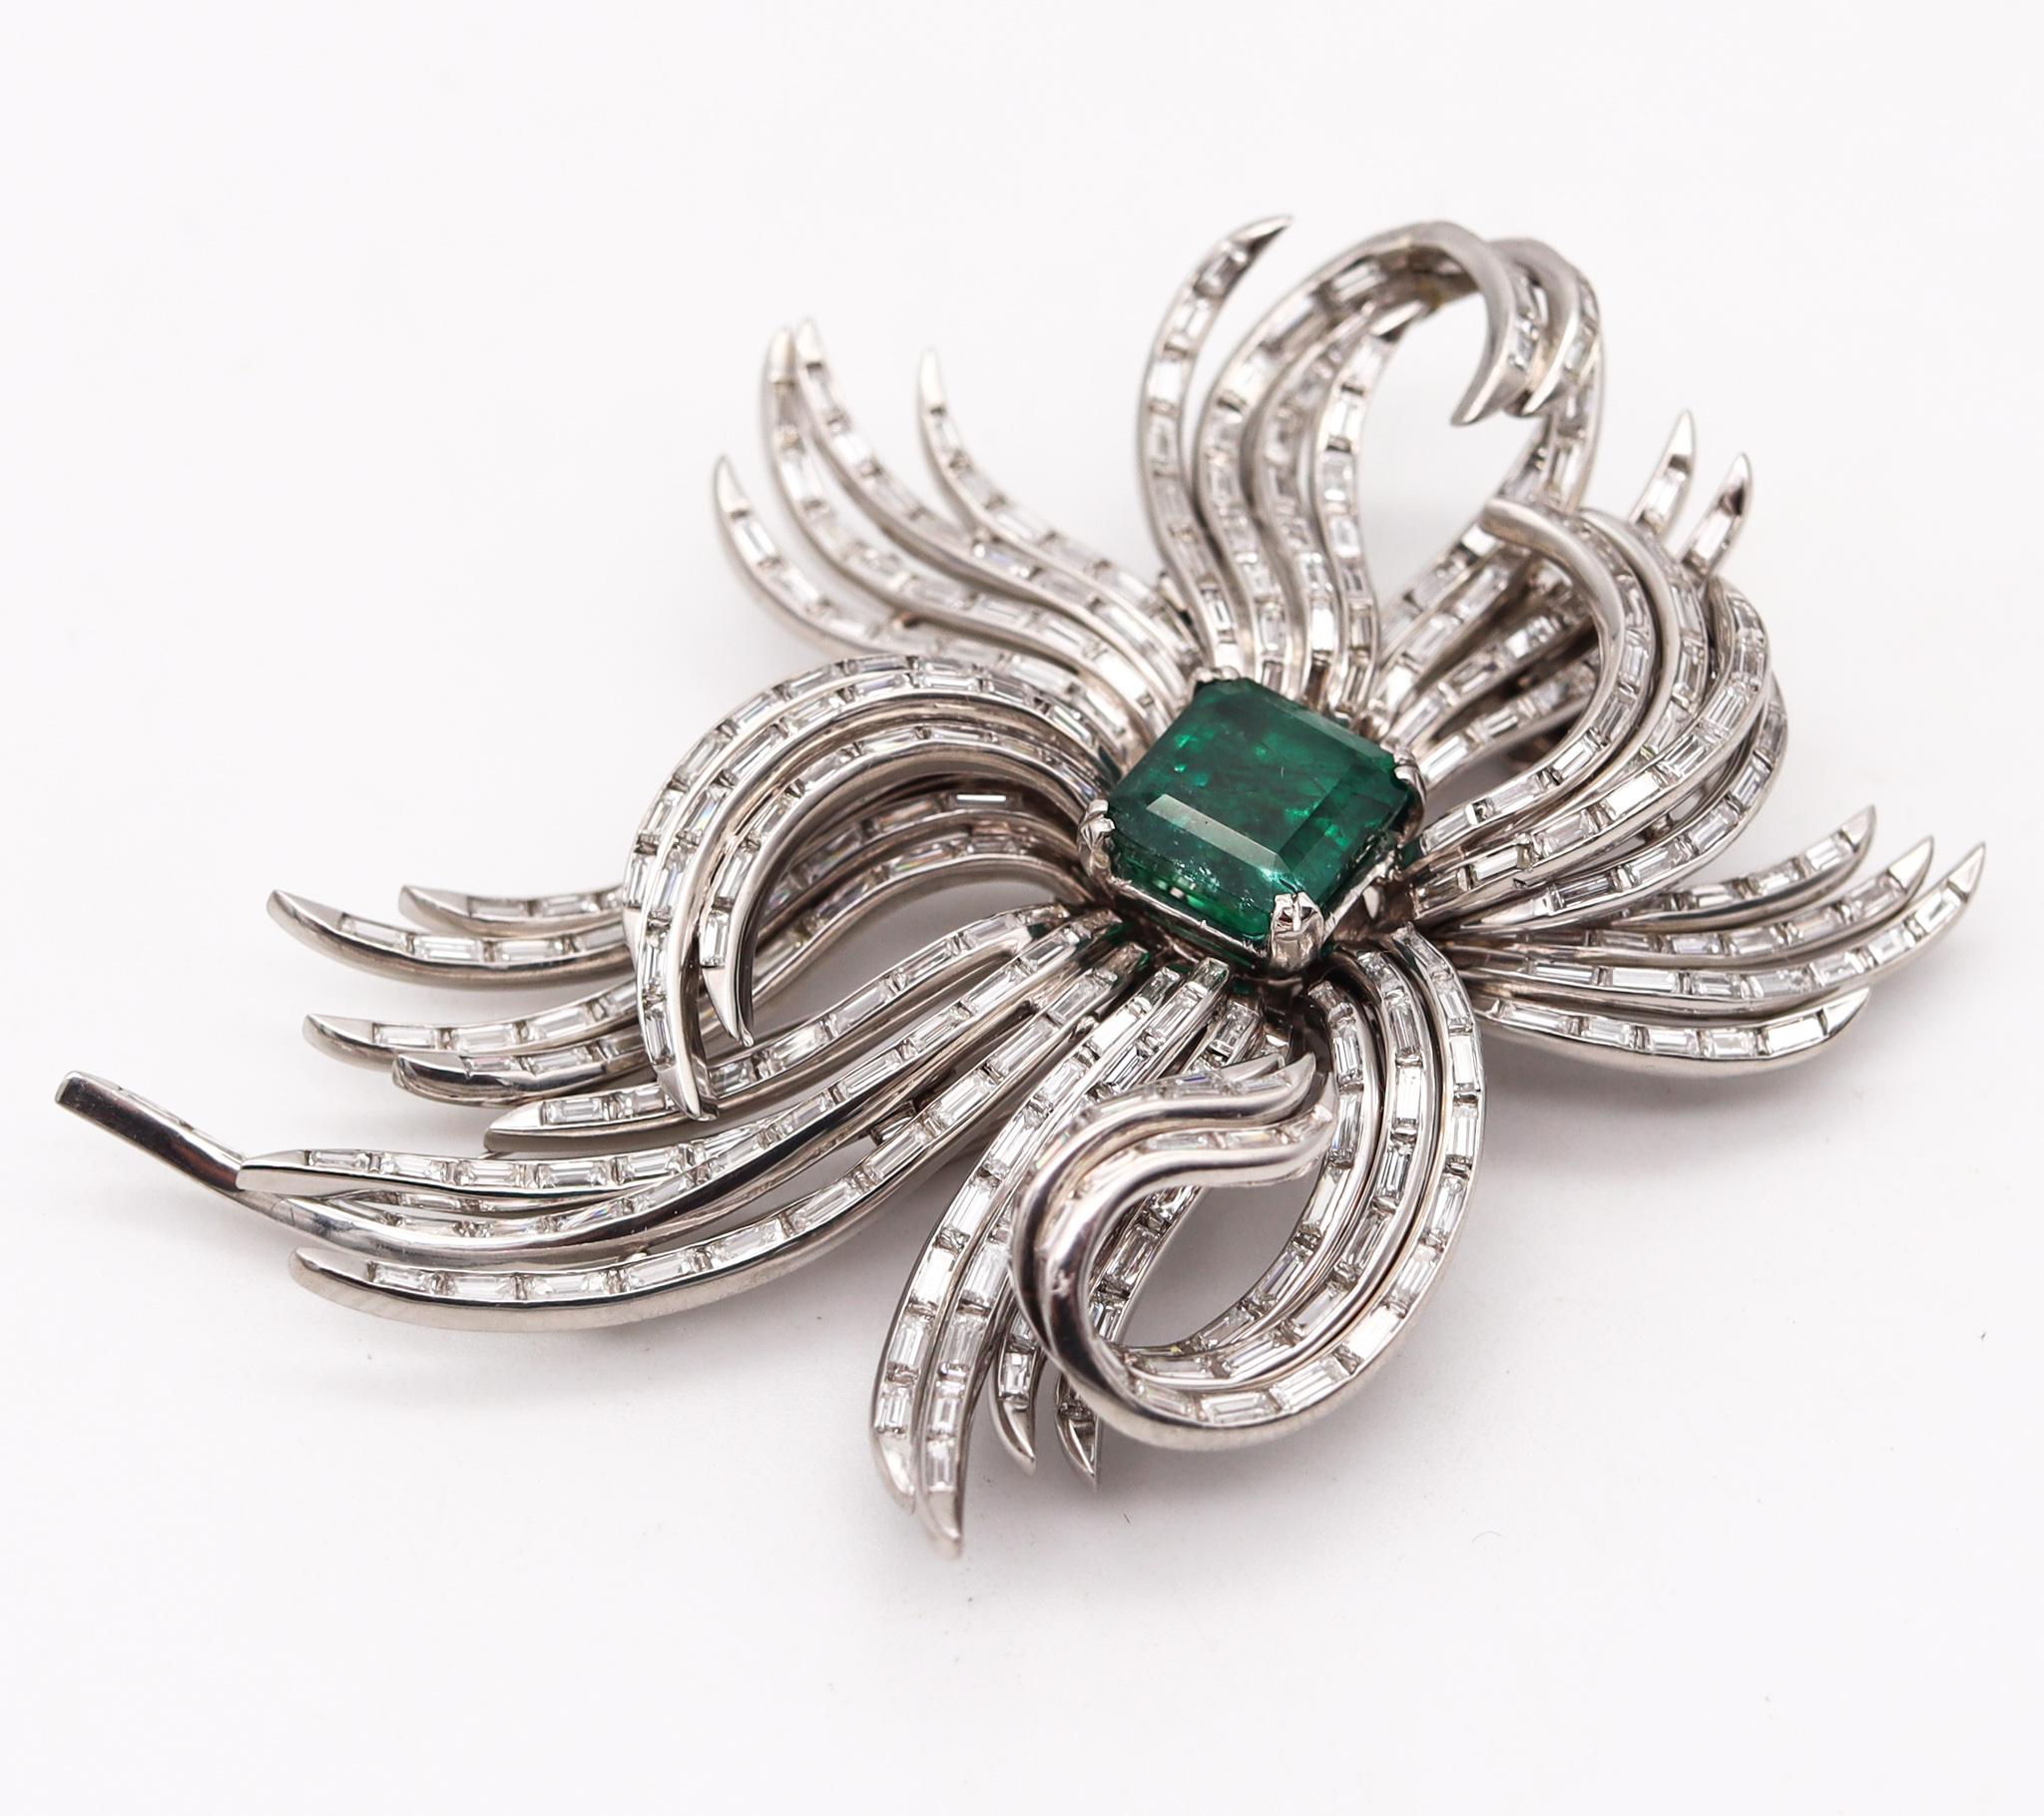 An art deco brooch with diamonds and emeralds.

Magnificent piece of jewelry, created during the late art deco period, back in the 1935. This fabulous gems-set brooch has been carefully assembled with multiples parts crafted in solid platinum